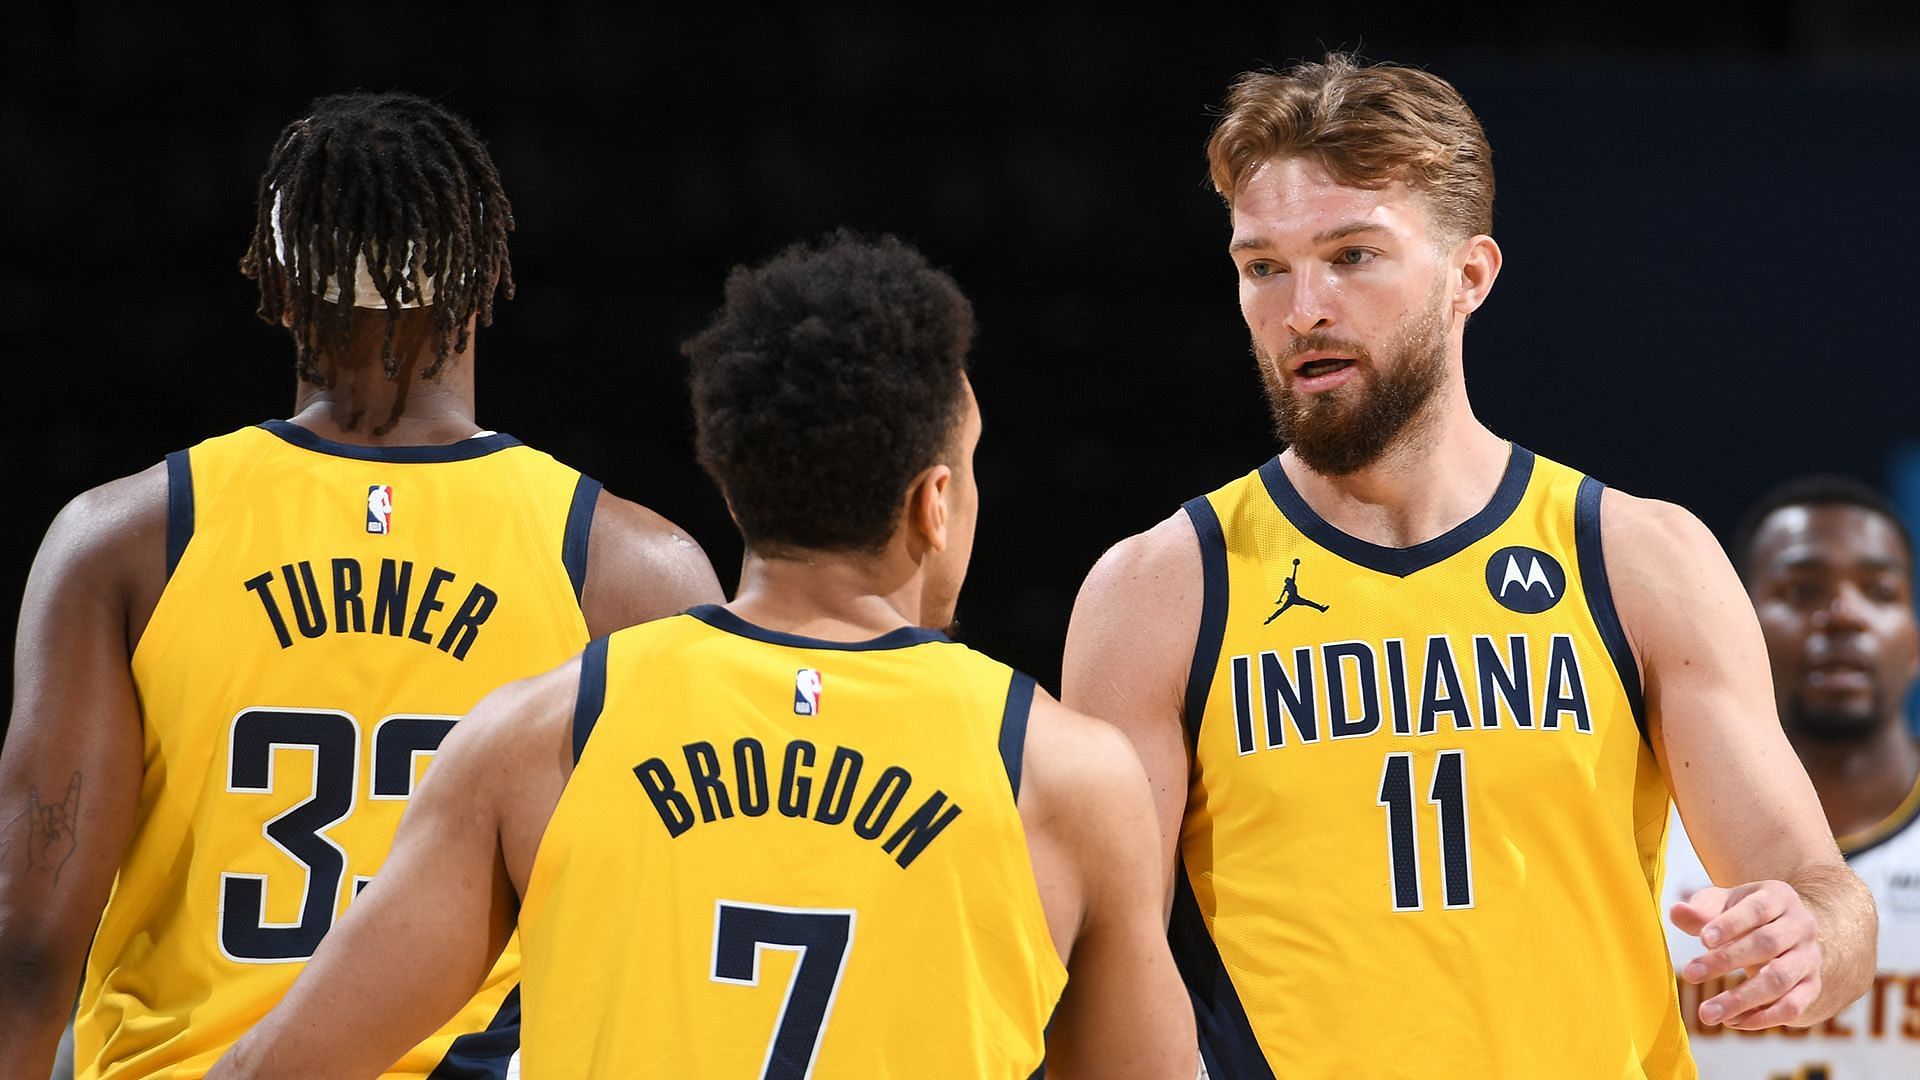 The Indiana Pacers have a solid foundation in Myles Turner, Domantas Sabonis and Malcolm Brogdon. [Photo: NBA.com]